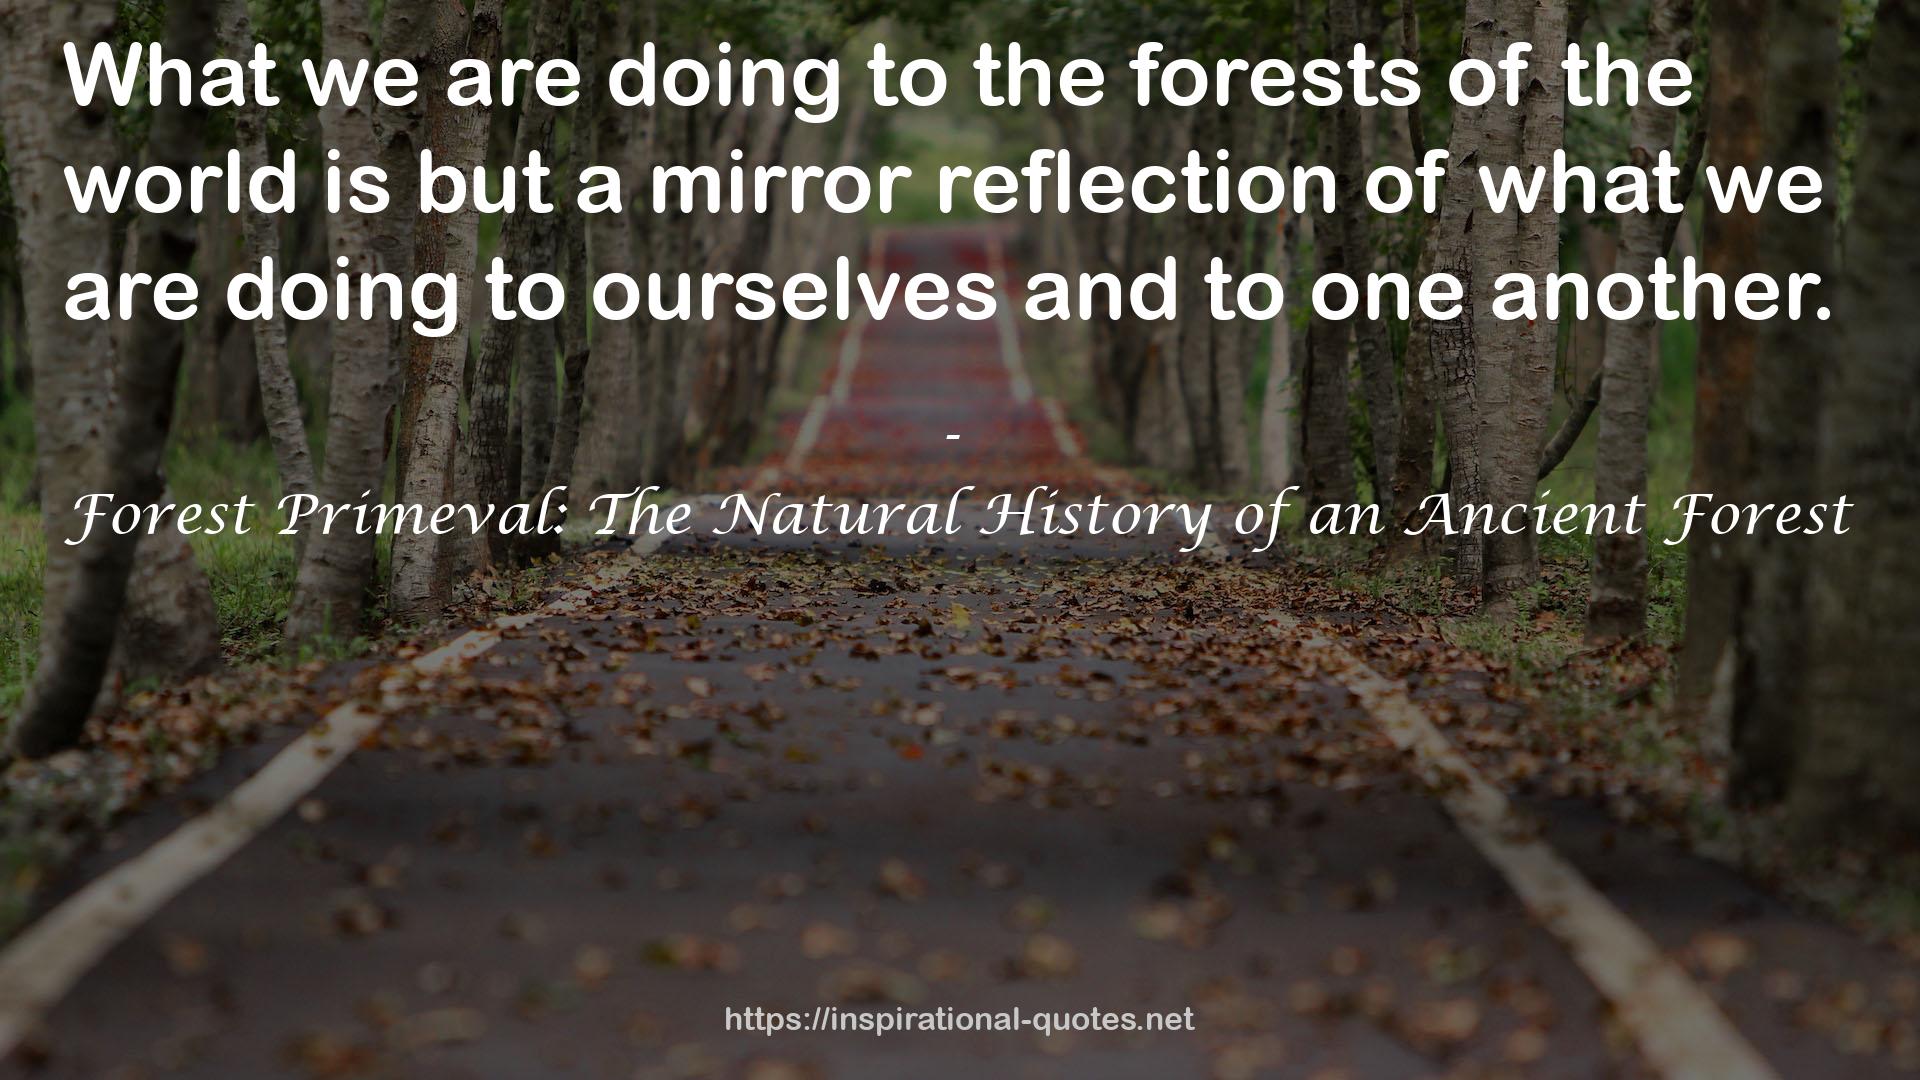 Forest Primeval: The Natural History of an Ancient Forest QUOTES